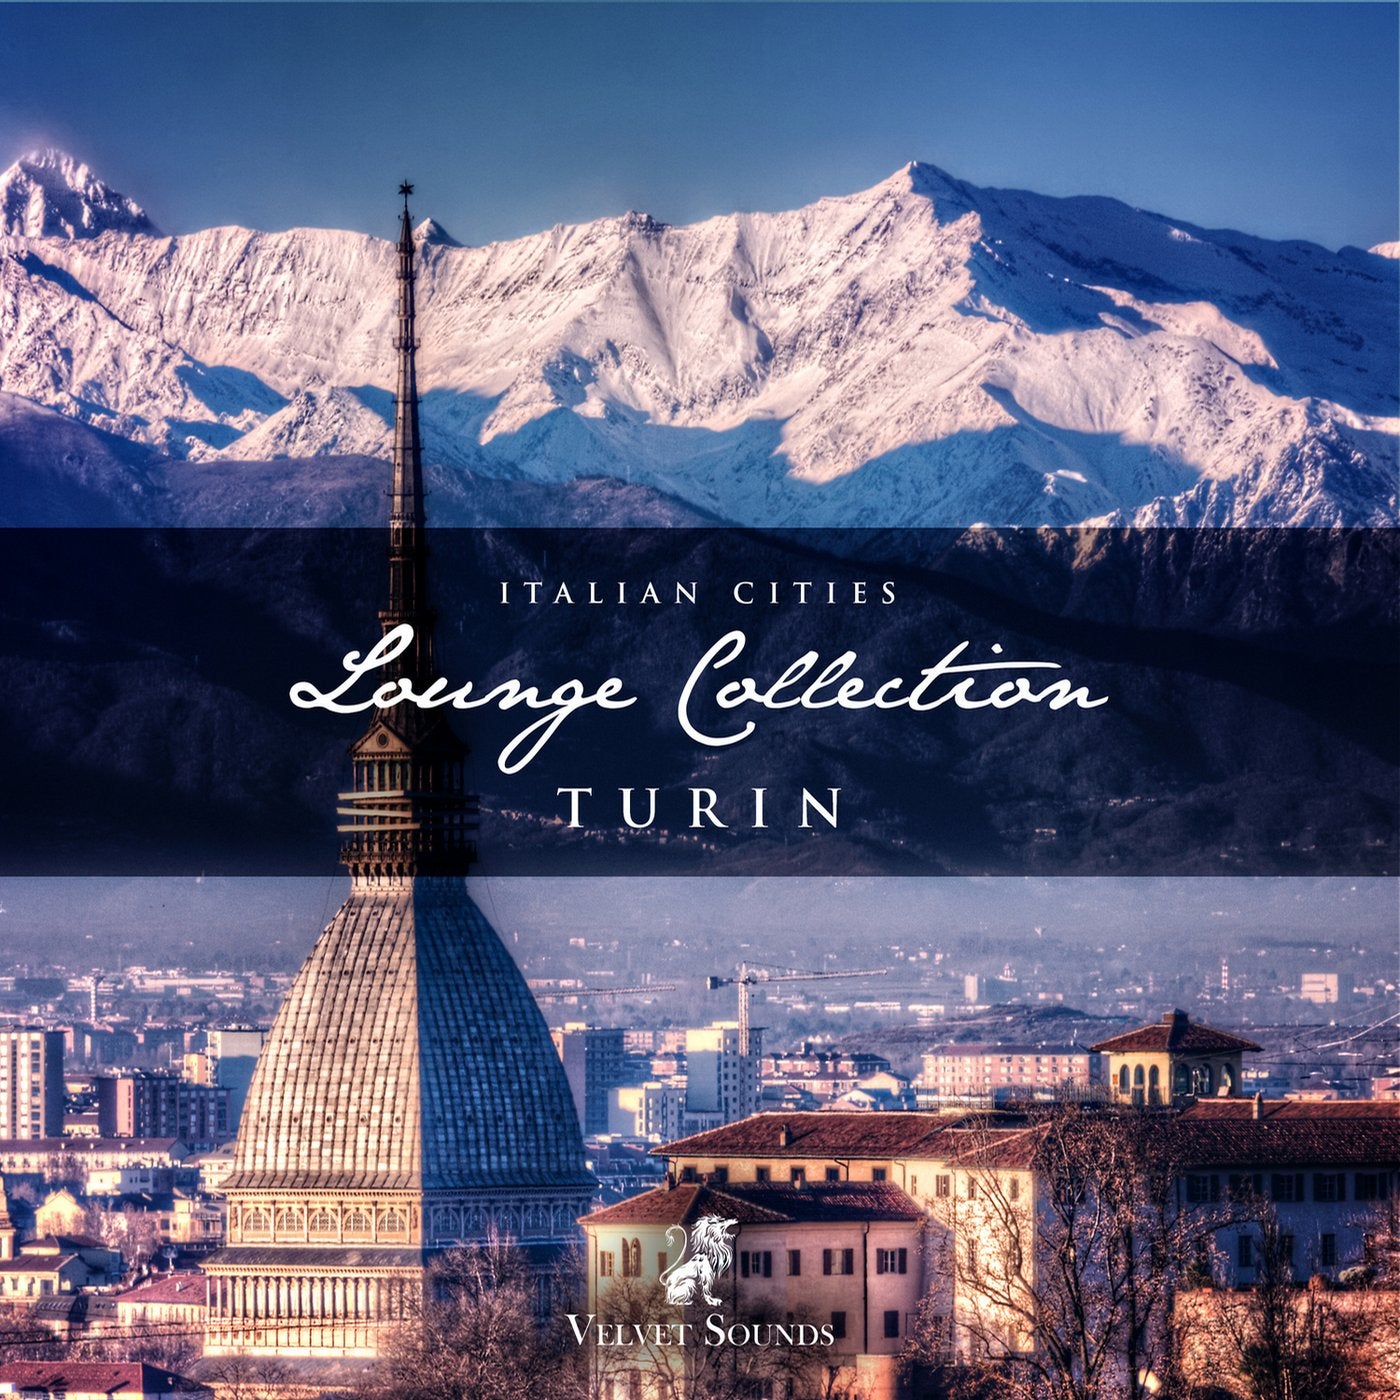 Italian Cities Lounge Collection Vol. 5 - Turin